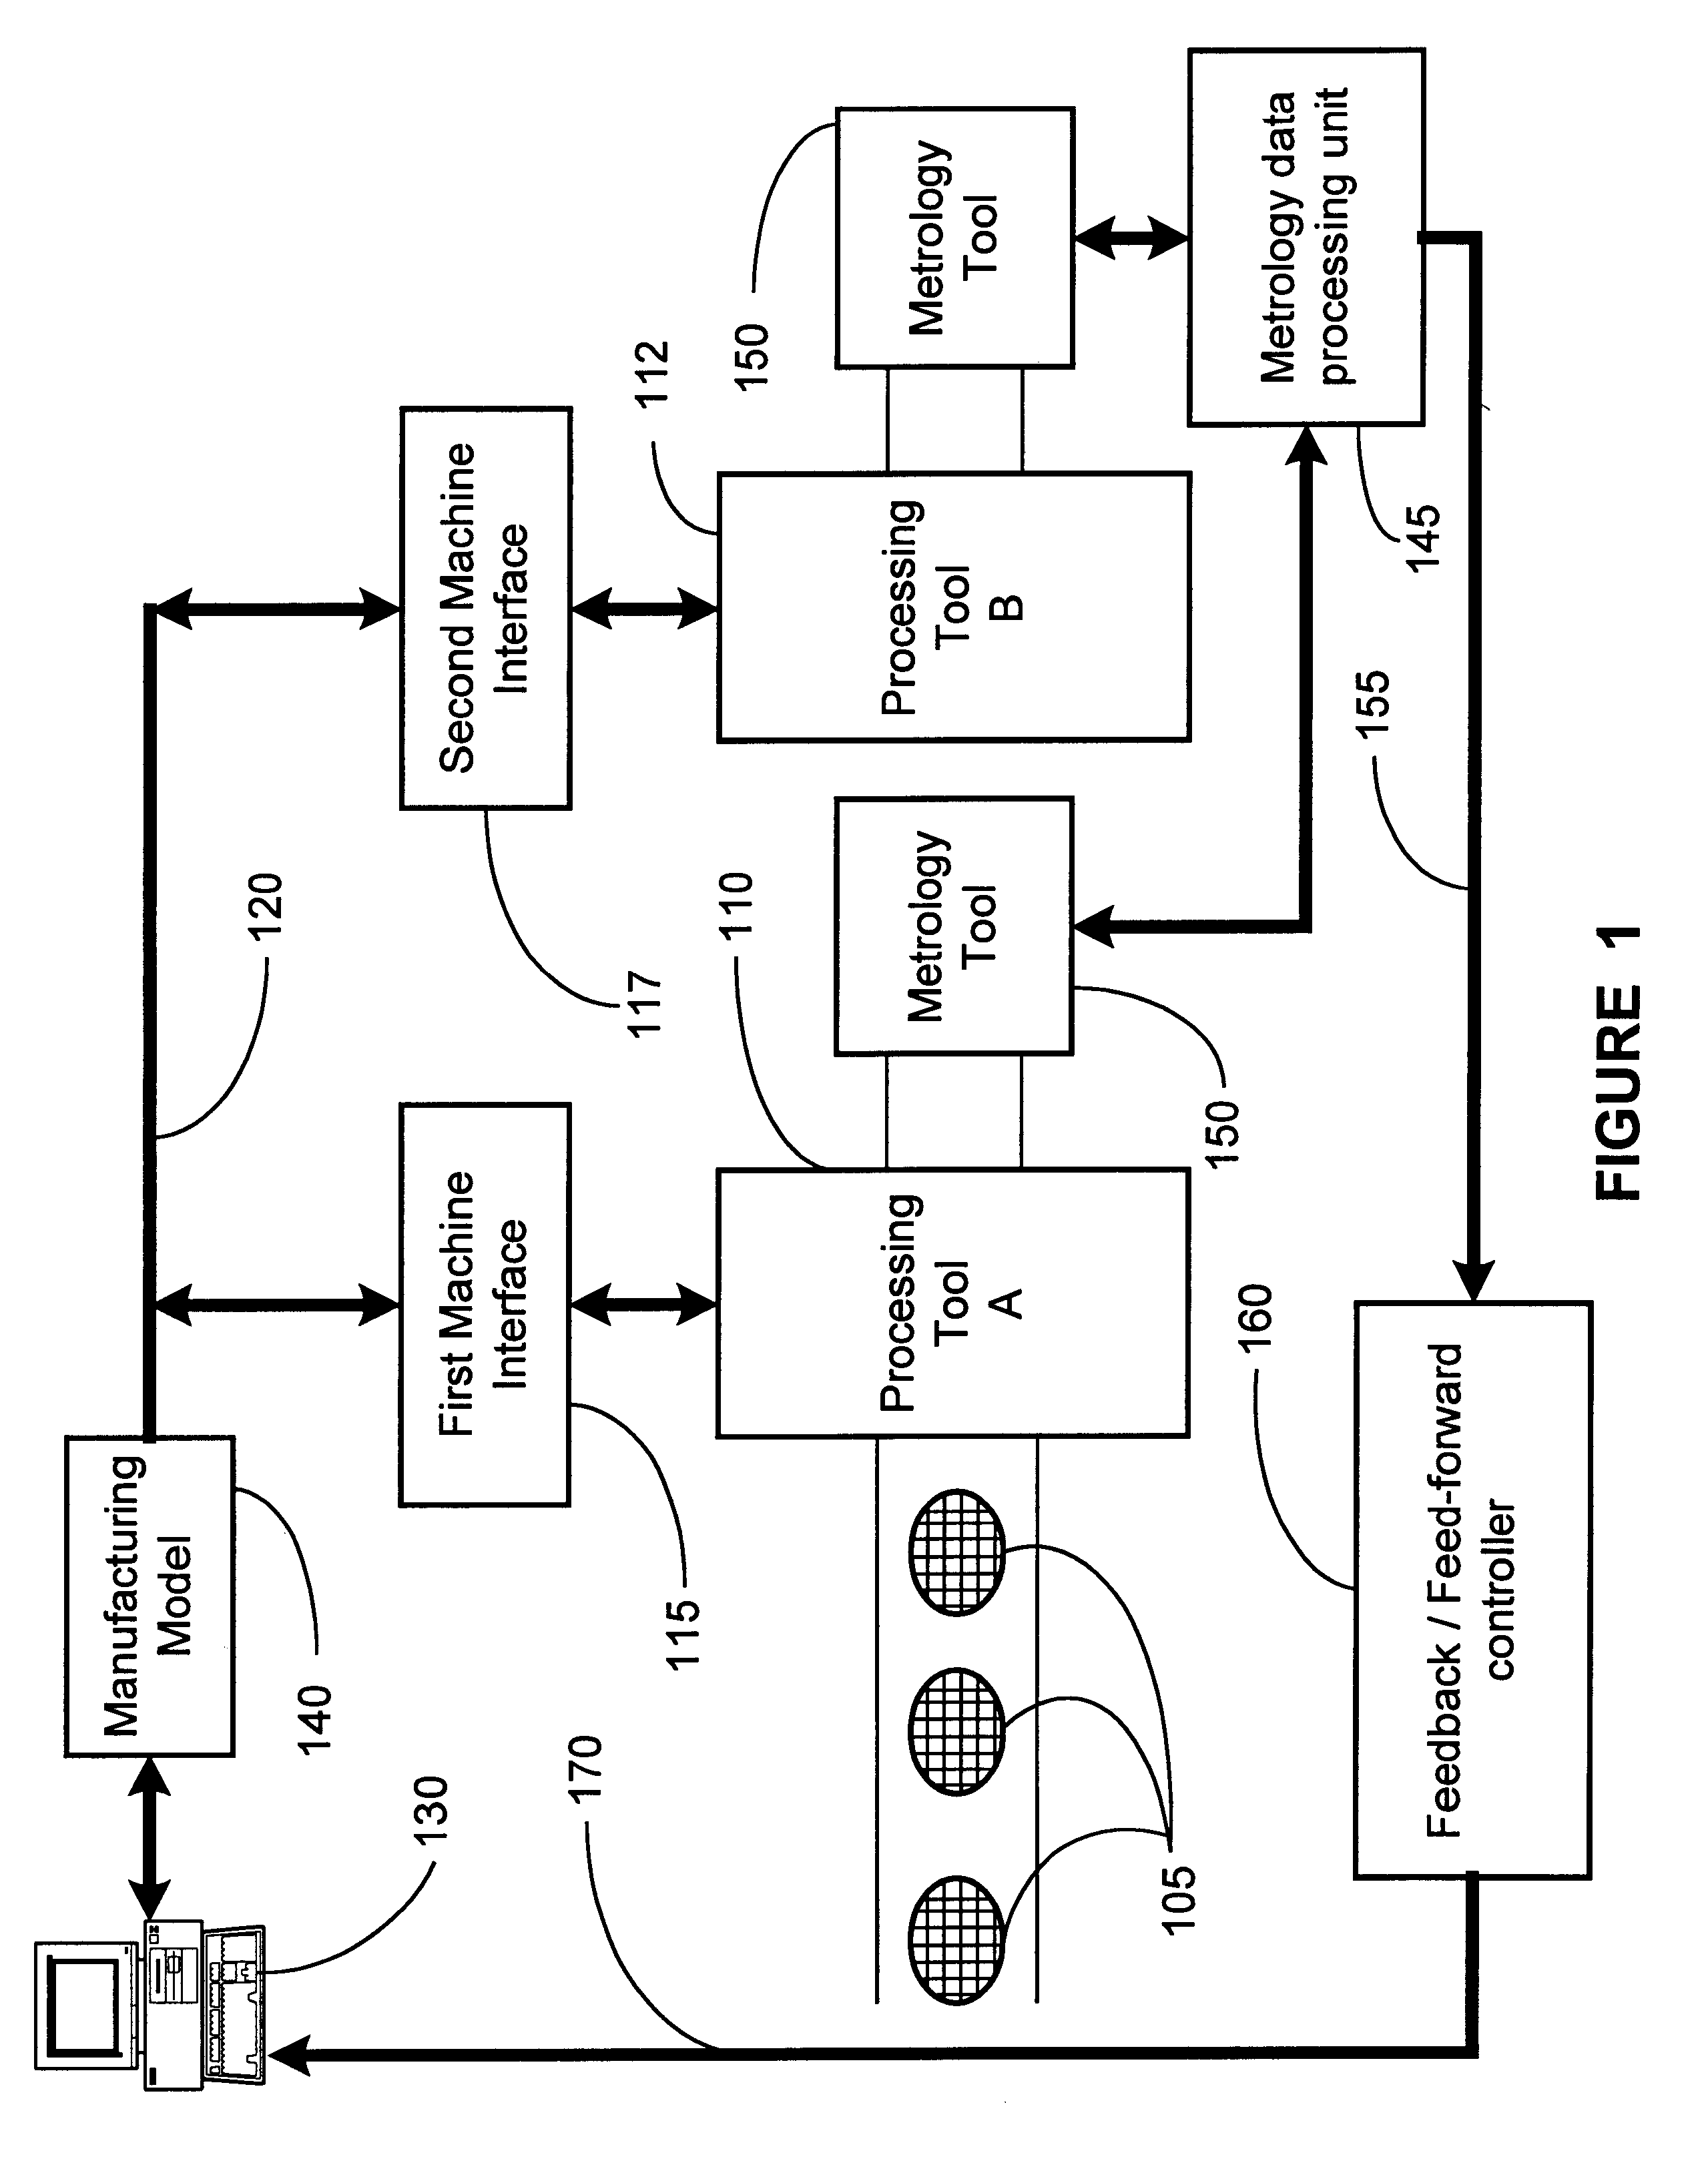 Method and apparatus for embedded process control framework in tool systems